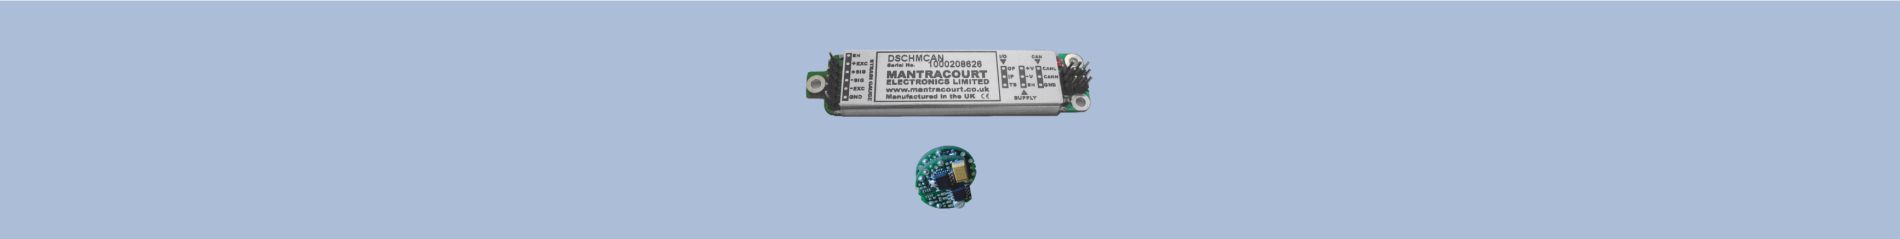 D-CAN CANBus Strain Gauge to Digital Data Converters